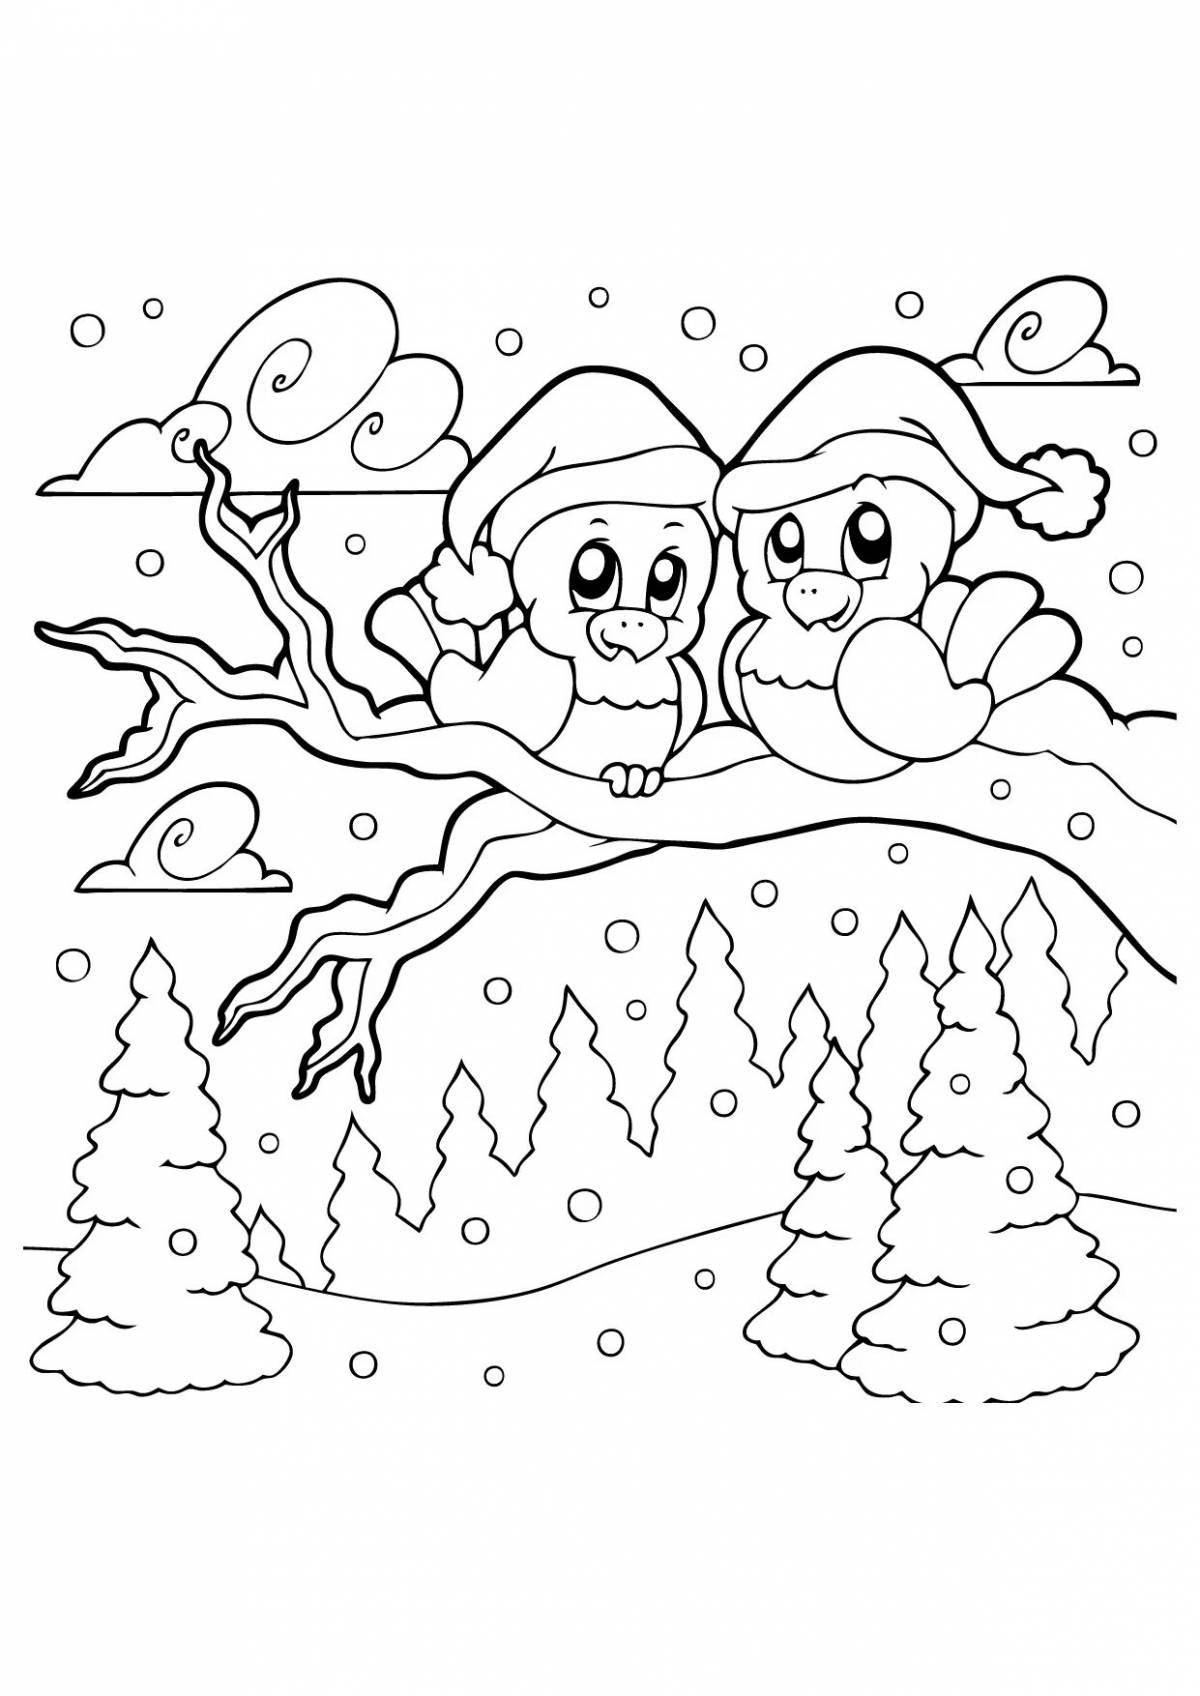 Delightful winter coloring book for kids 6-7 years old